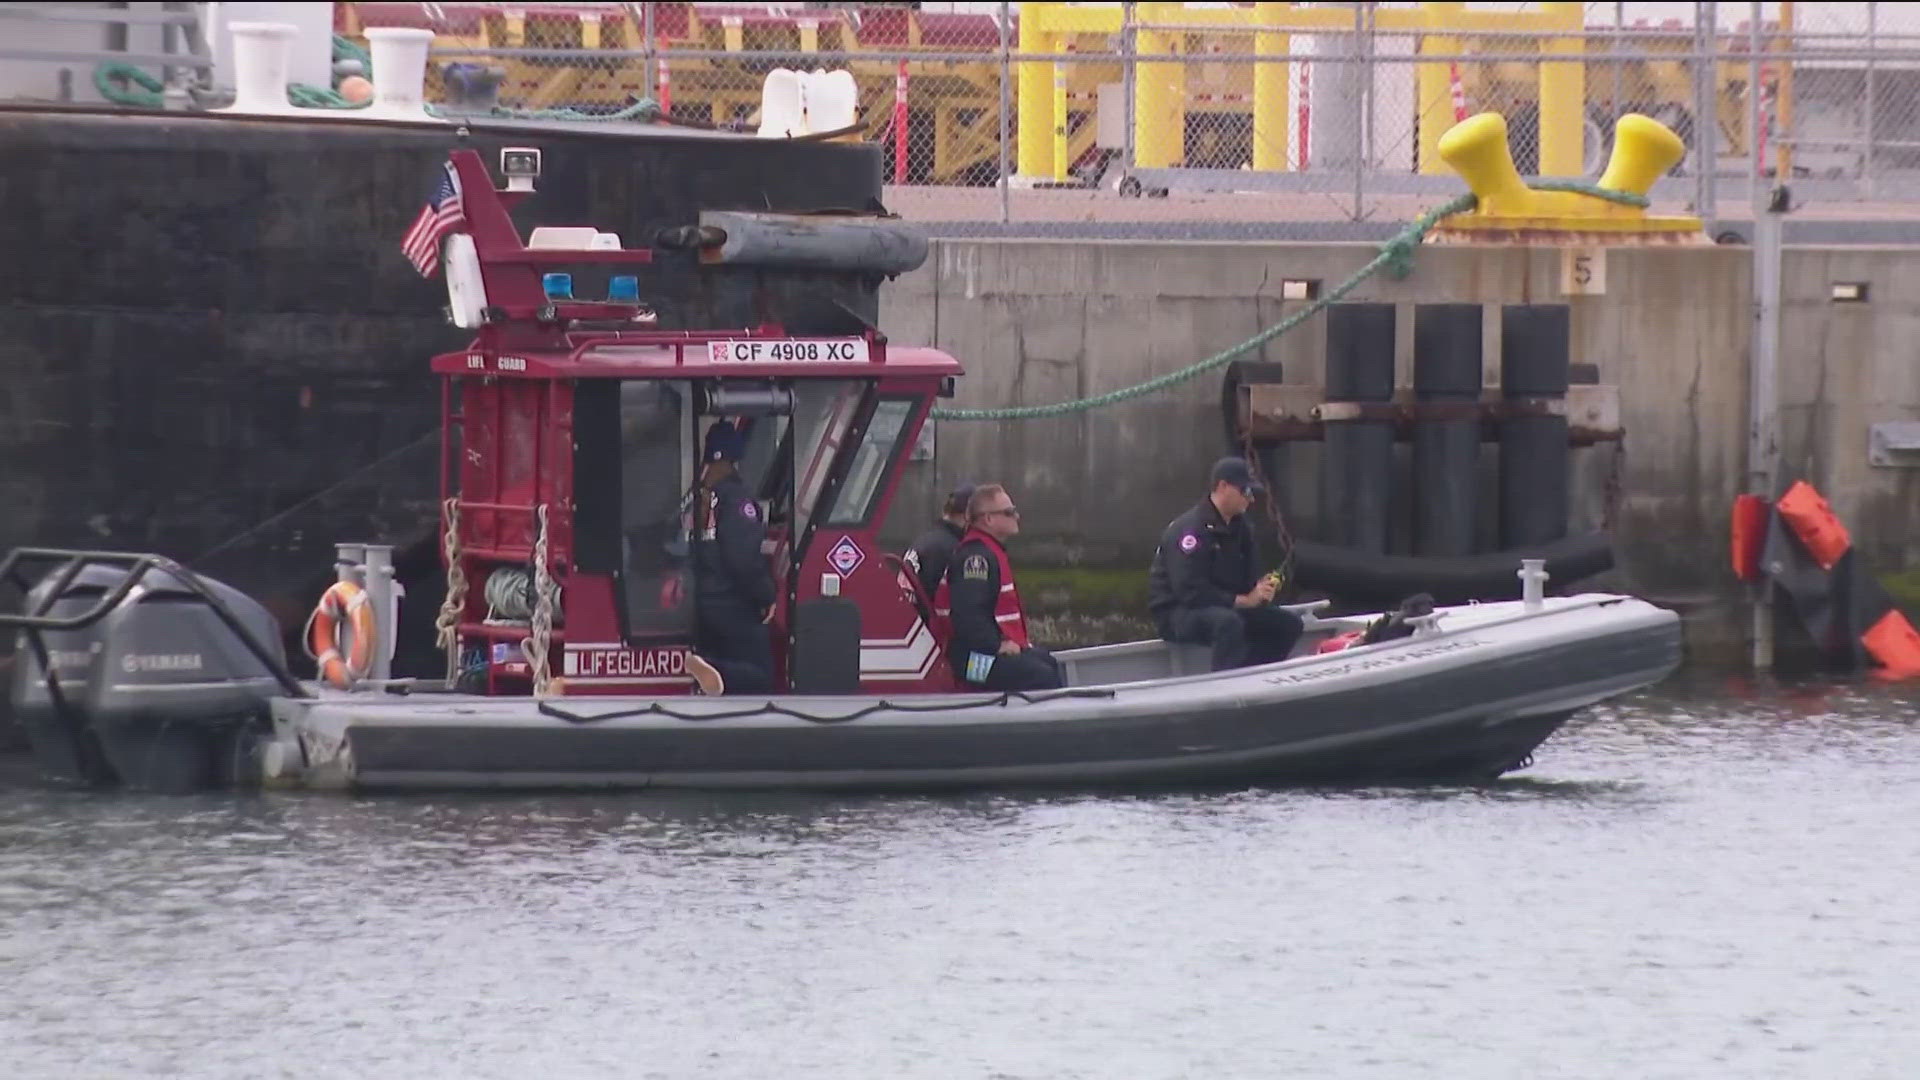 The annual countywide Mass Rescue Operations exercise in San Diego Bay was held Wednesday.